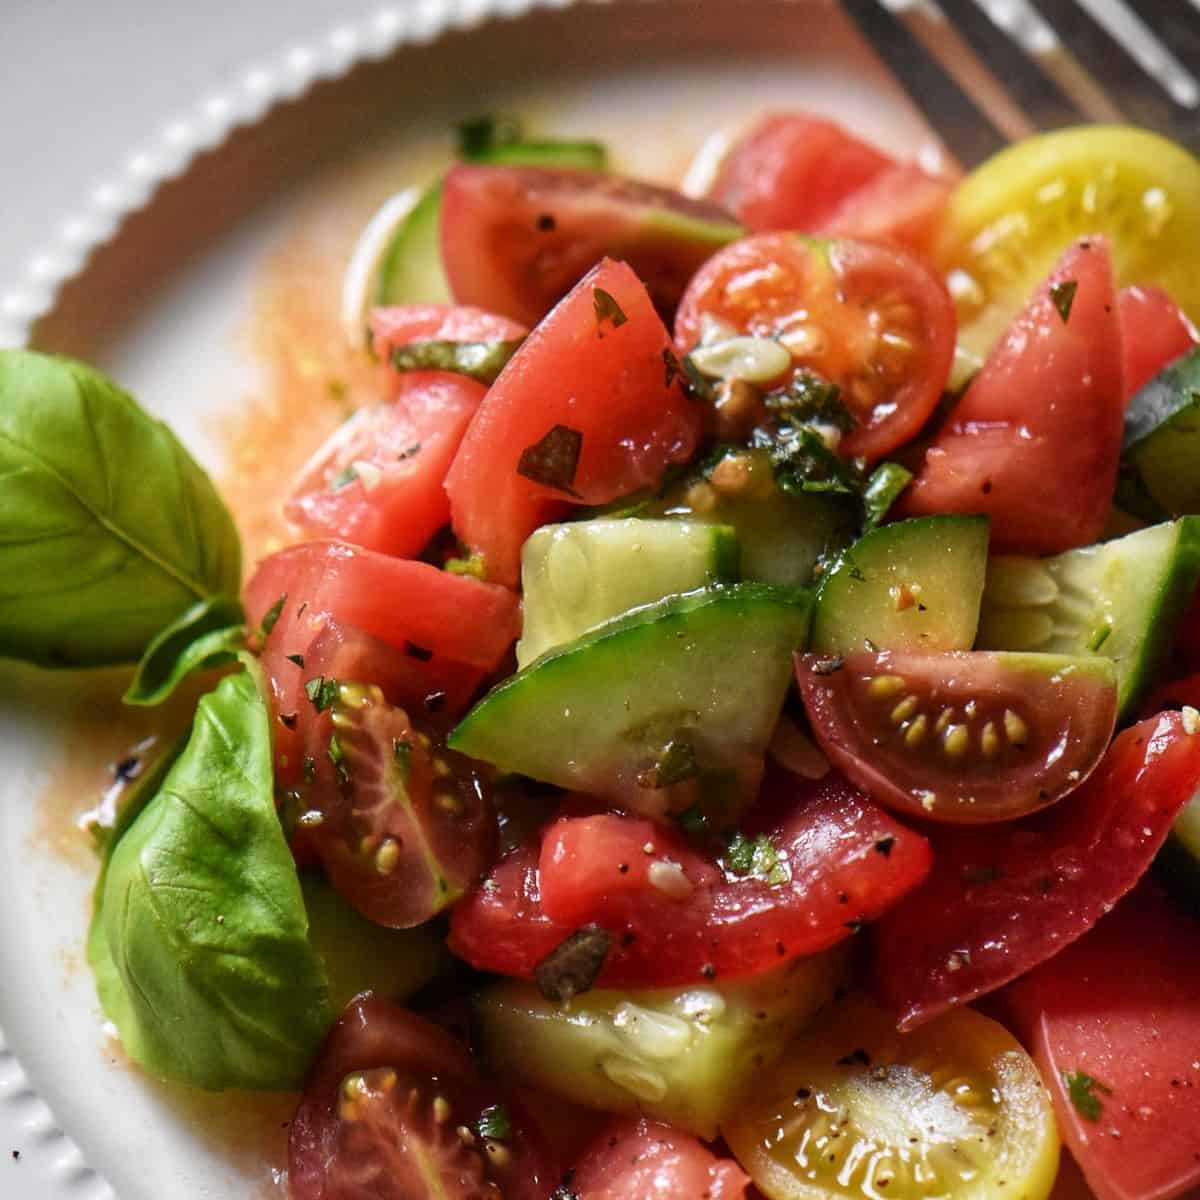 A cucumber tomato salad in a white plate surrounded by fresh tomatoes and a few pieces of Italian rustic bread.